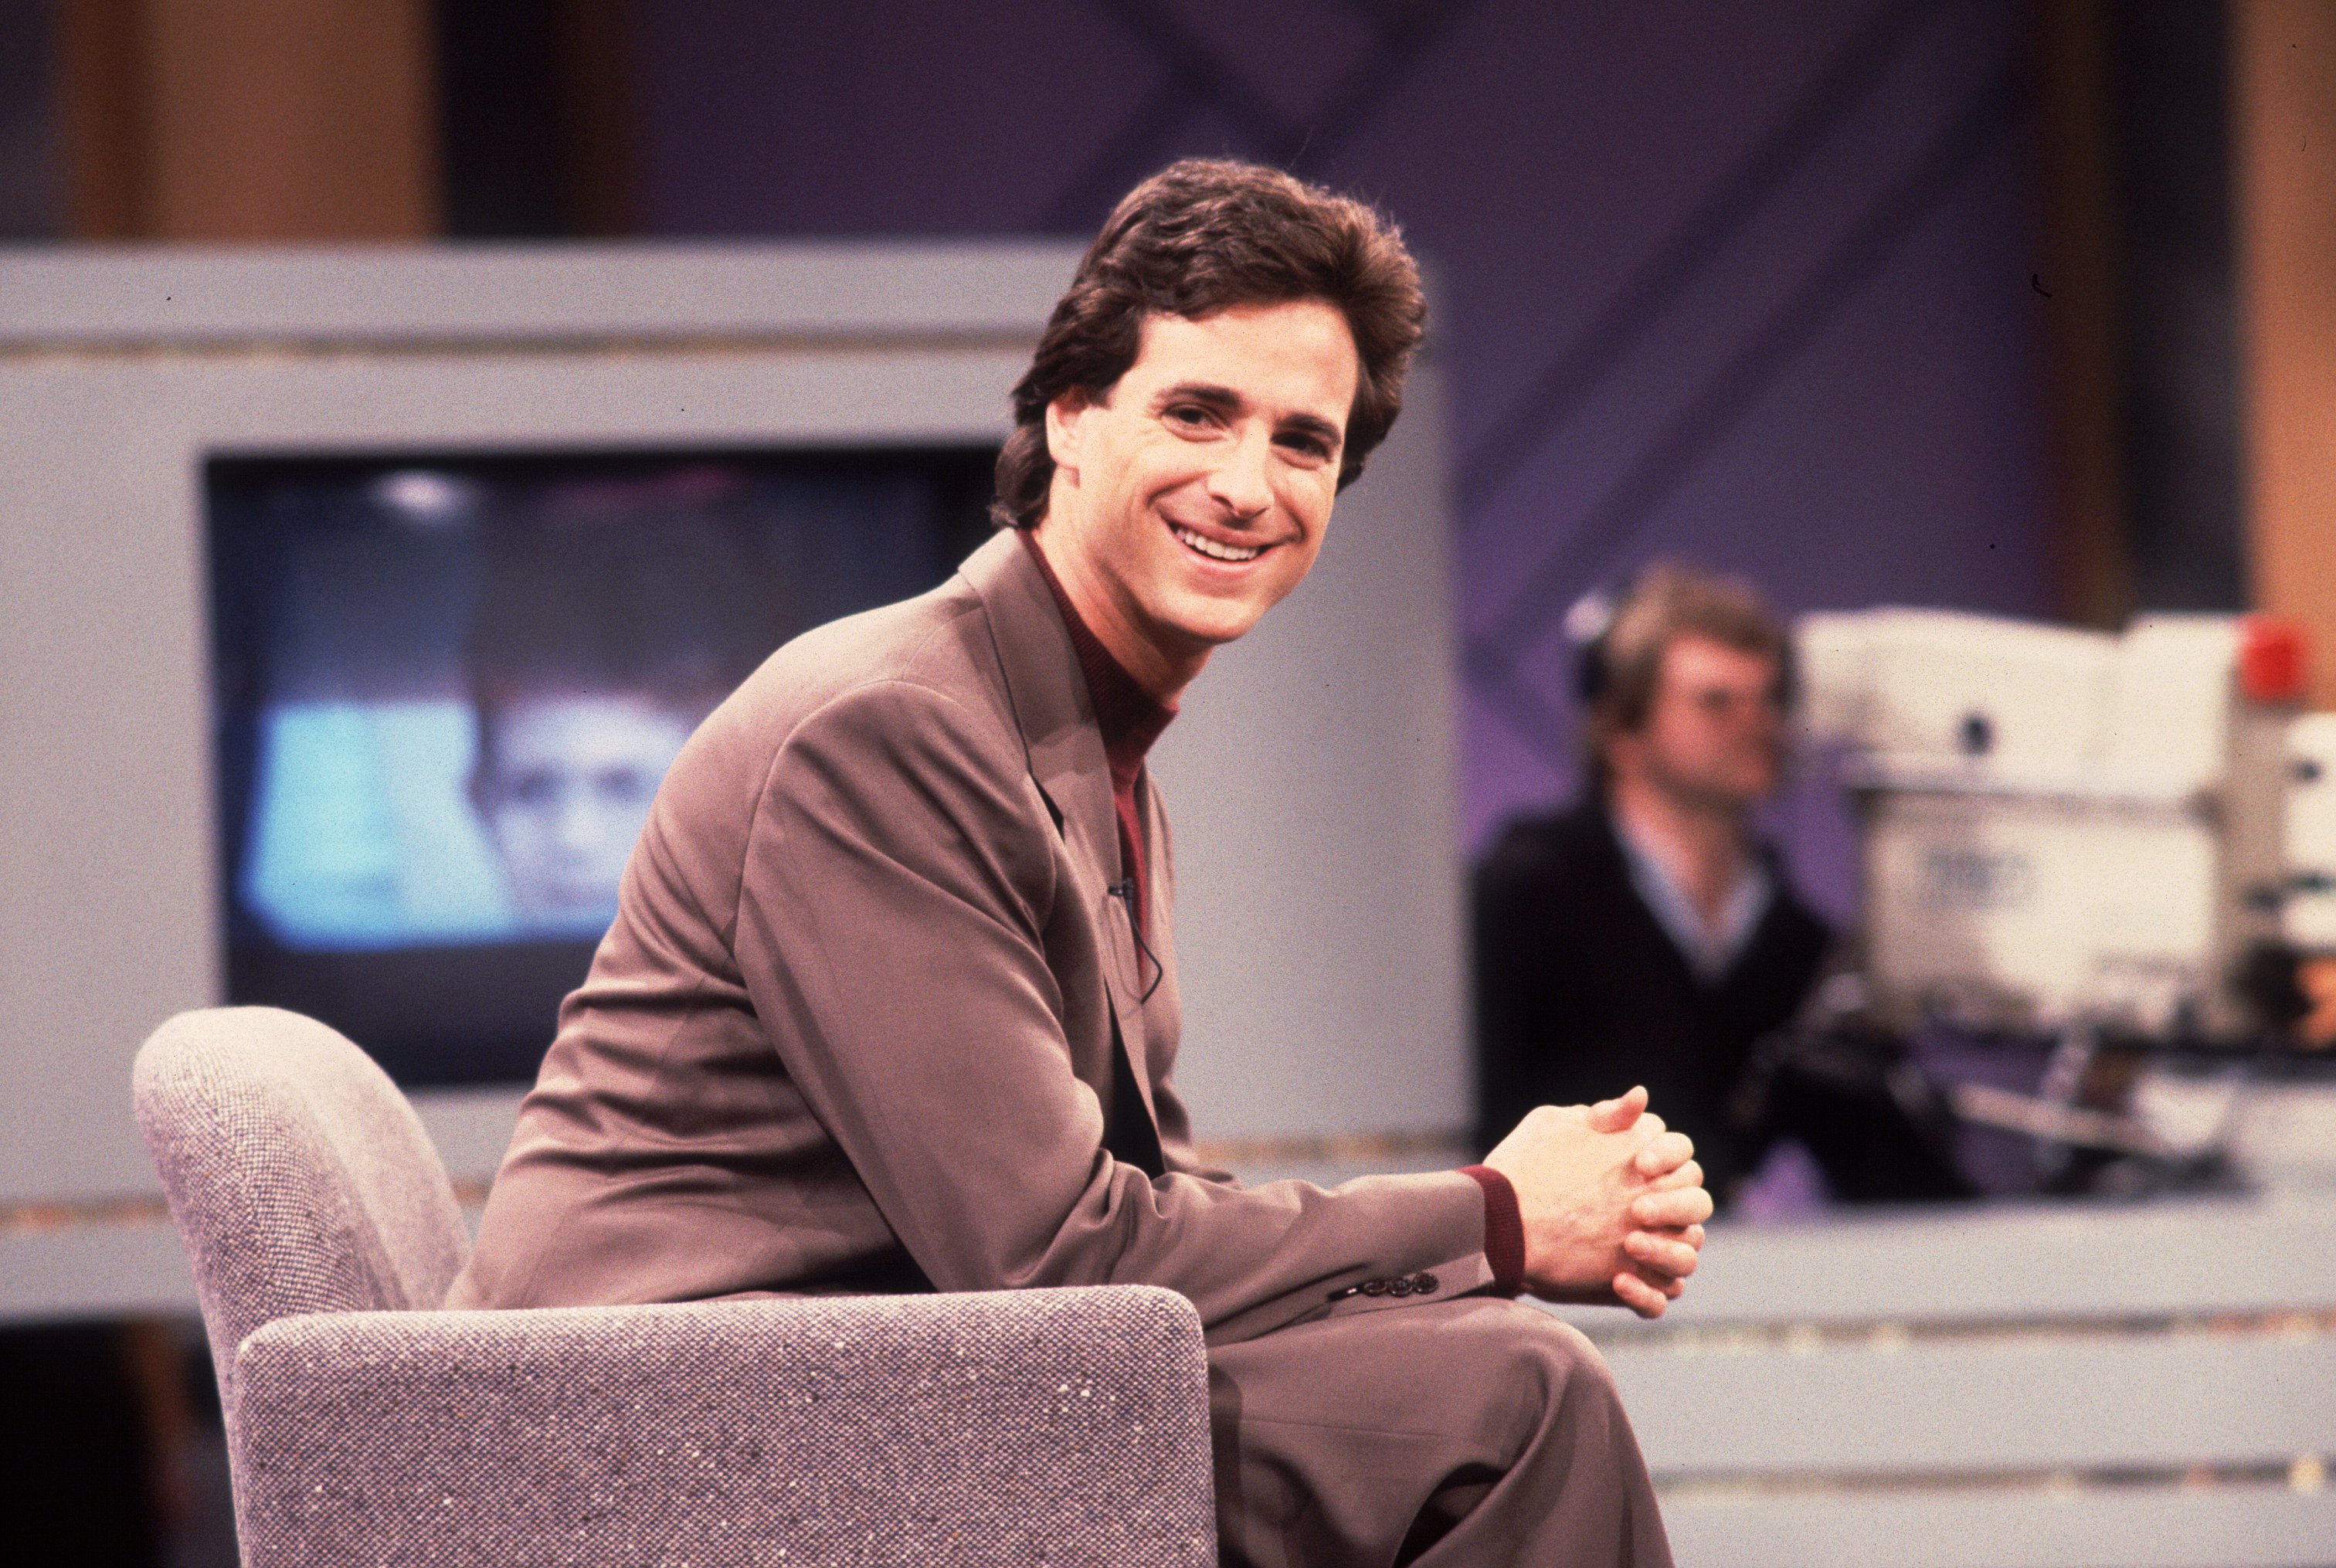 Bob Saget appears on the Oprah Winfrey Show, Chicago, Illinois, April 24, 1990 | Source: Getty Images 